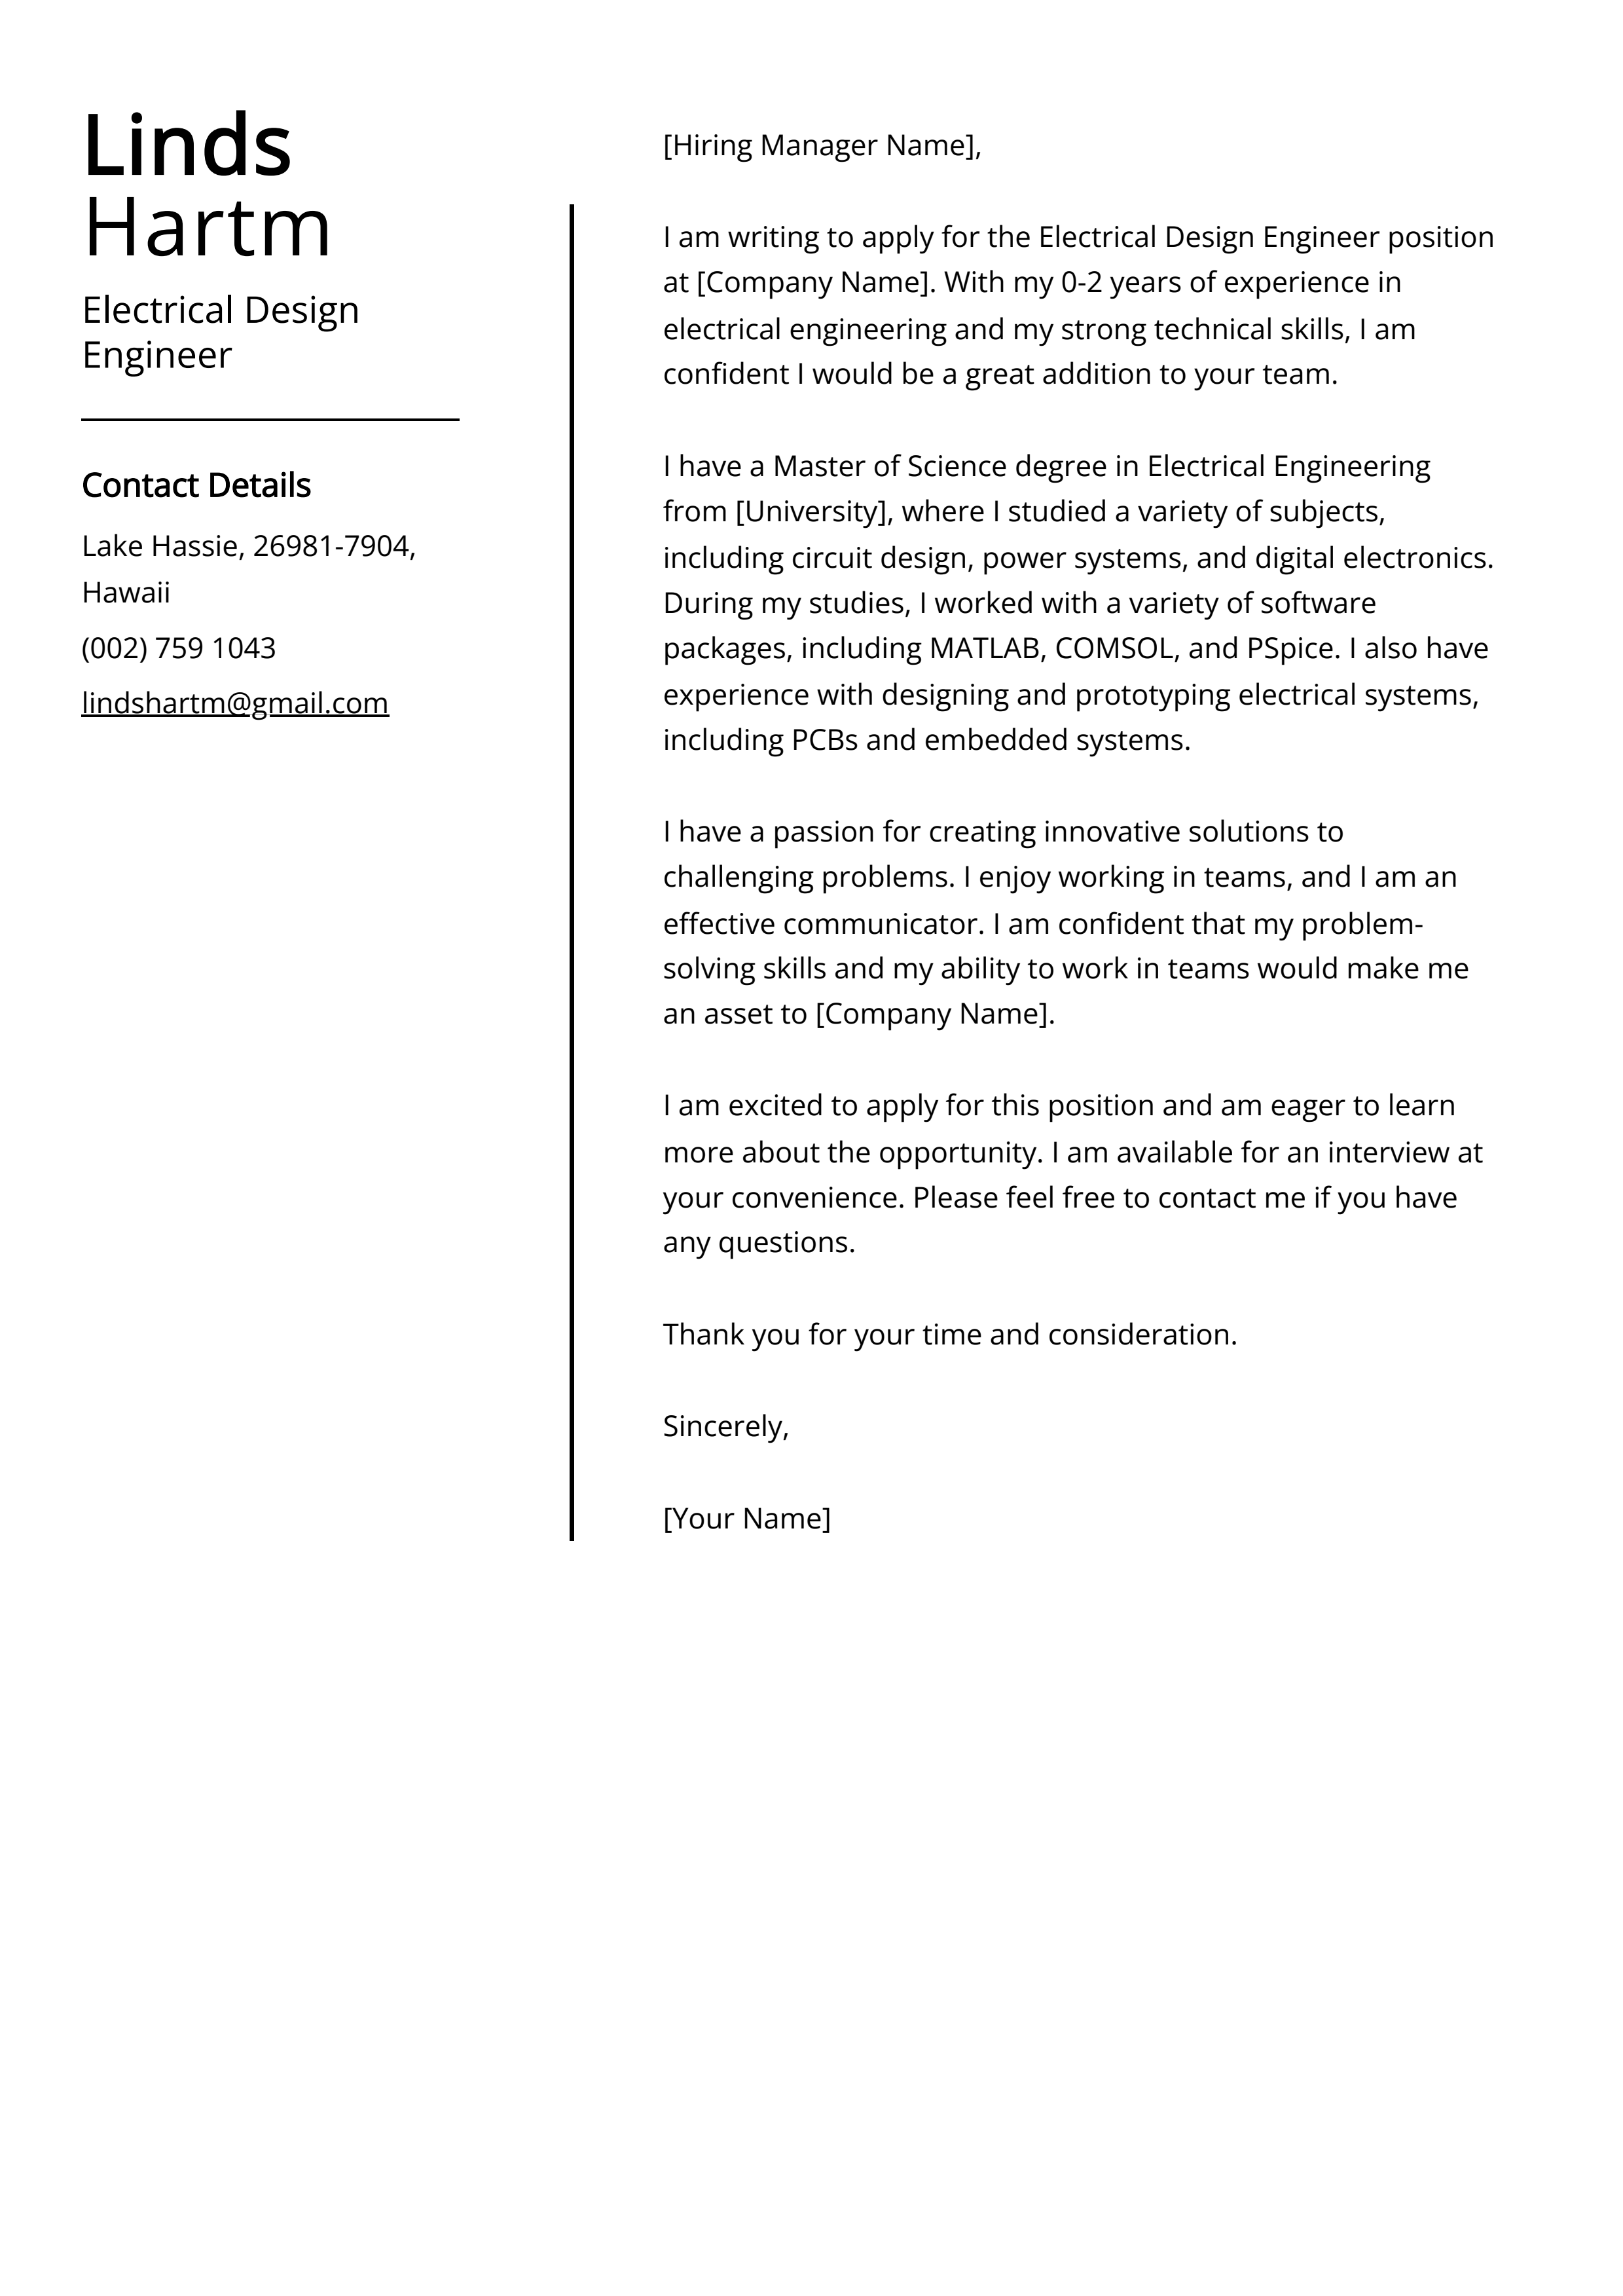 Electrical Design Engineer Cover Letter Example